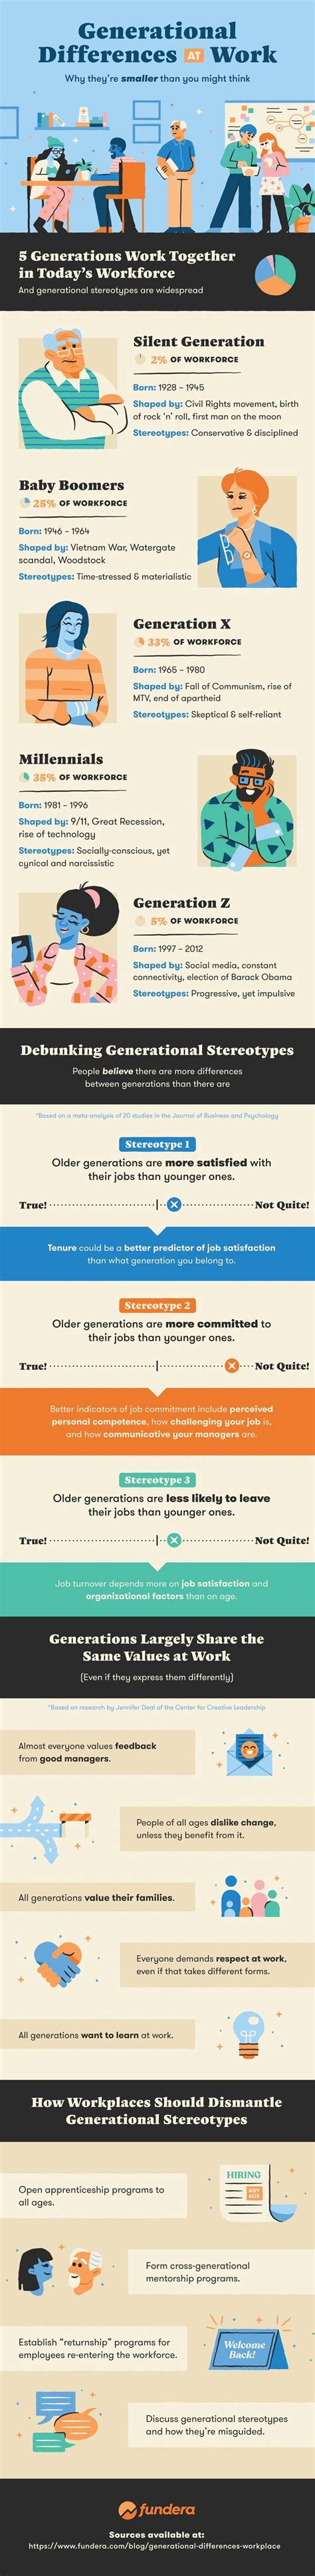 Workplace Generational Stereotypes How True Or False Infographic